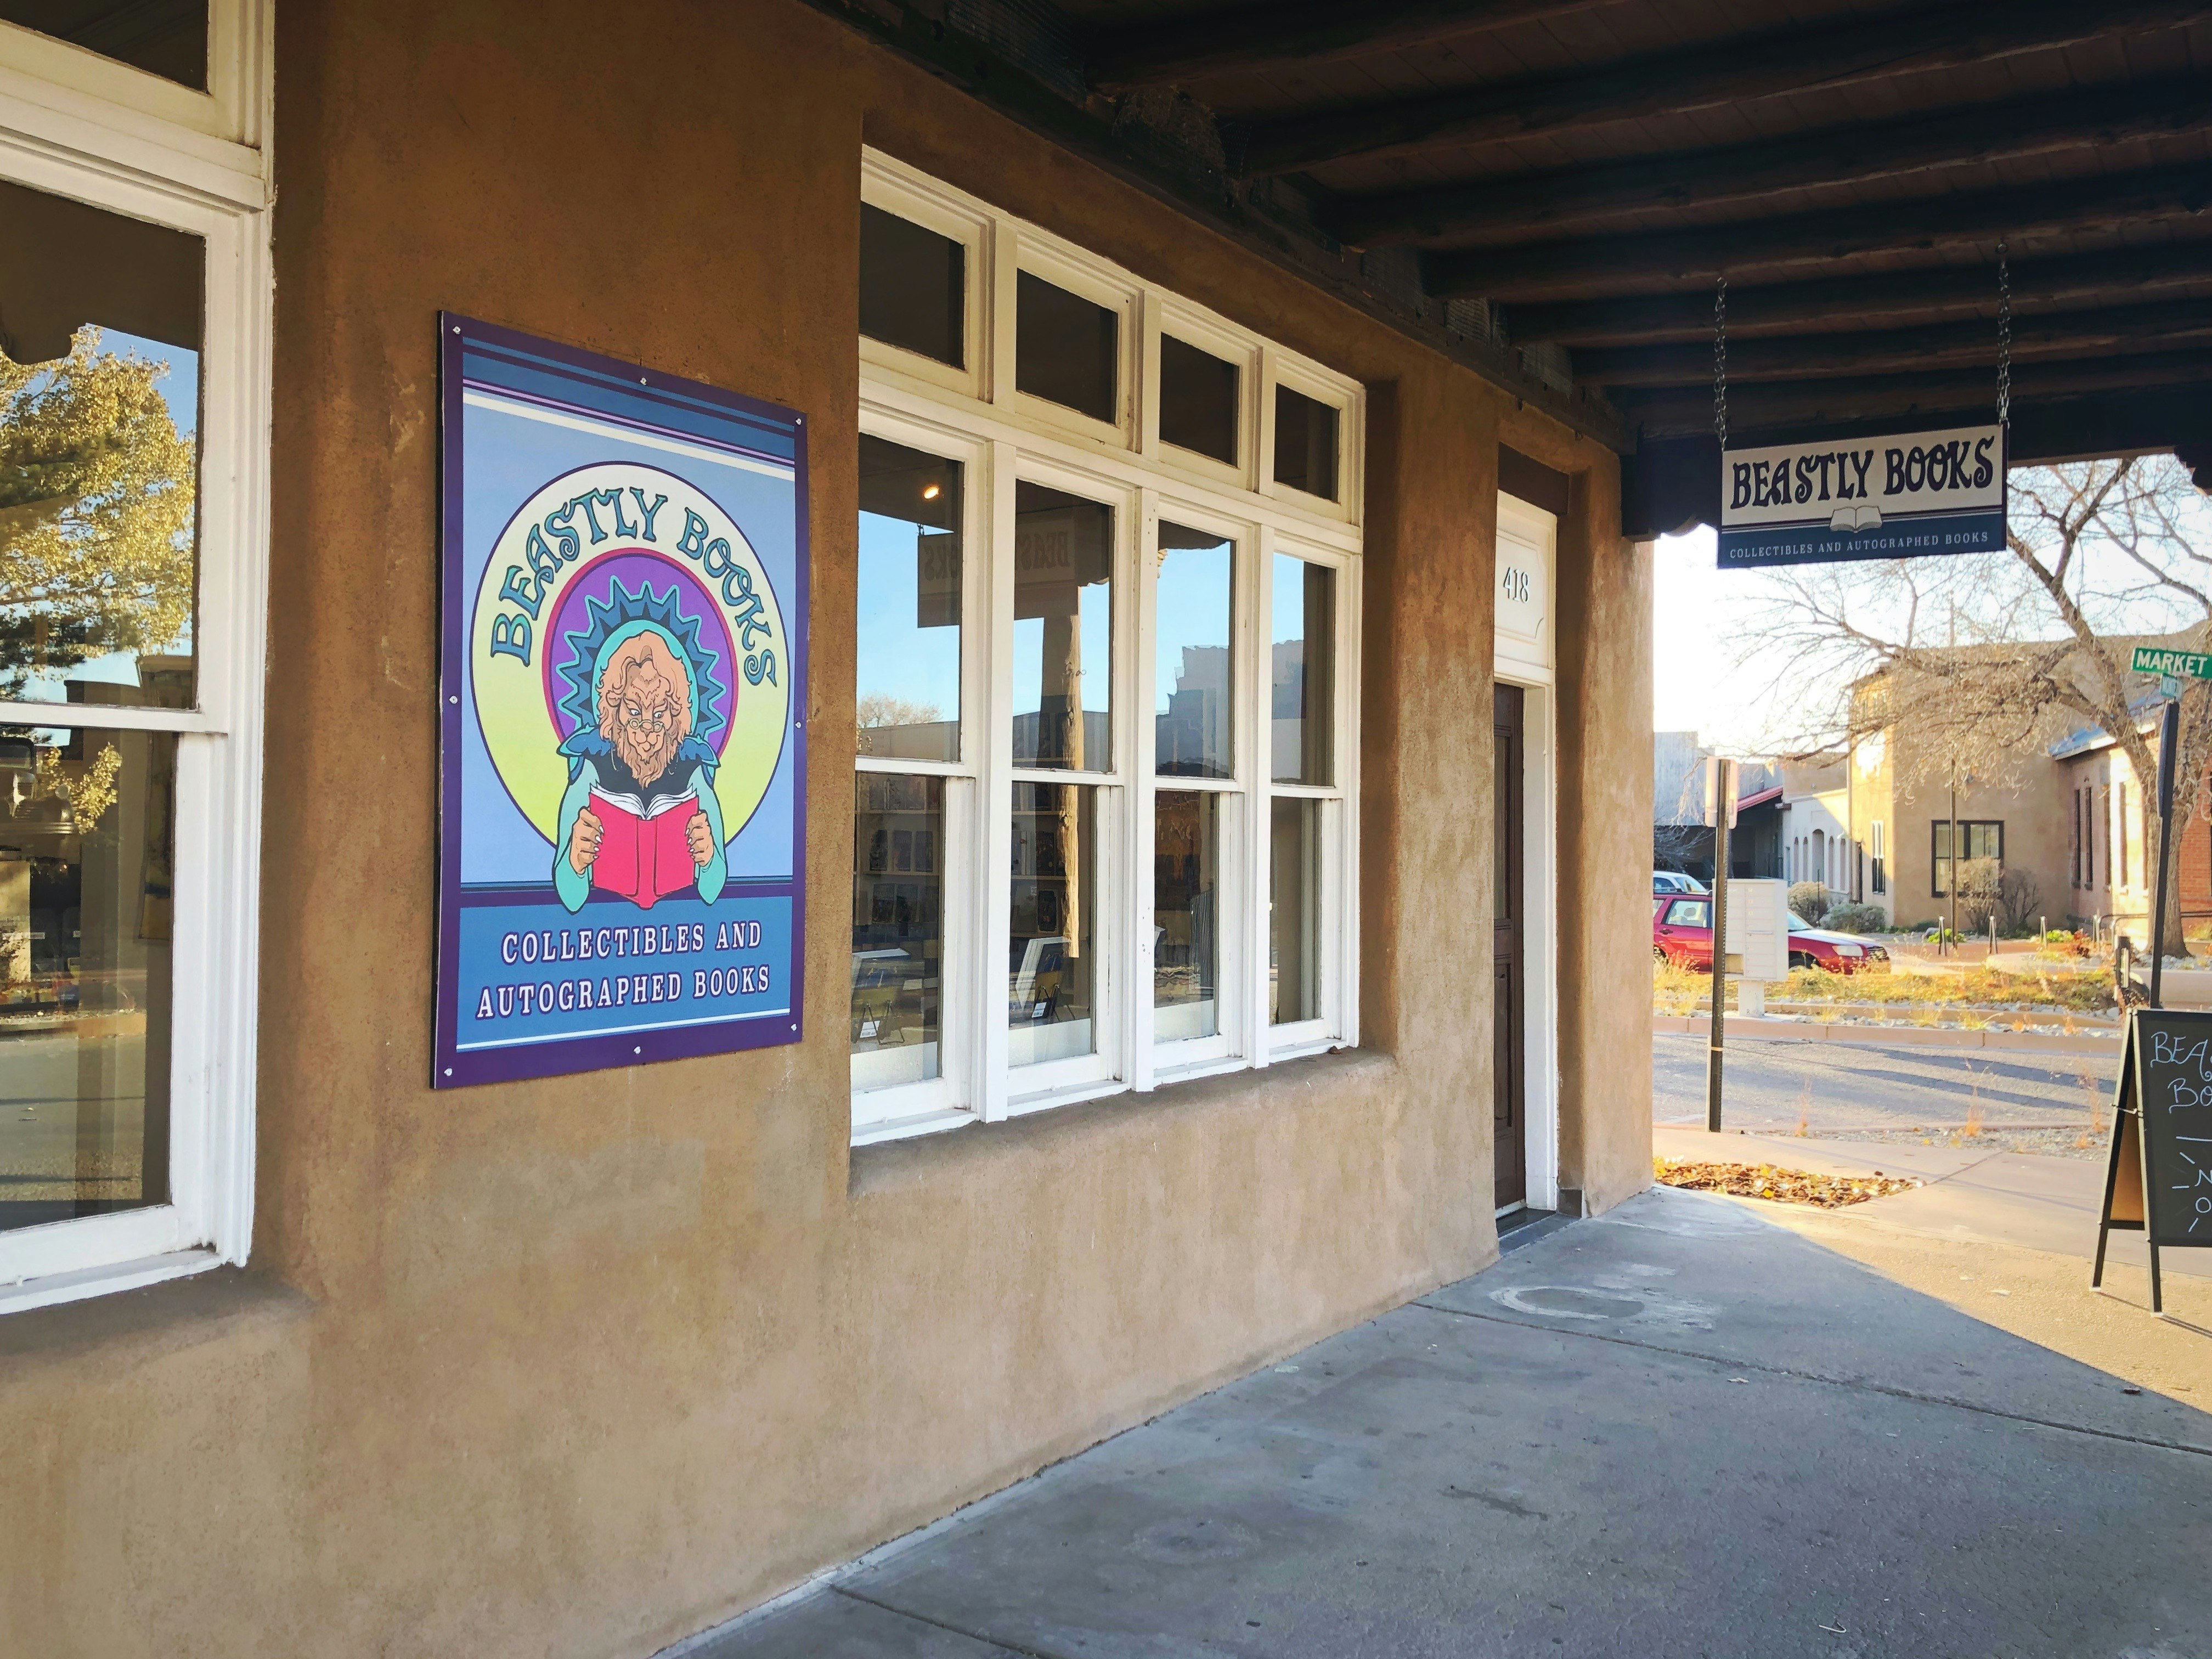 The exterior of Beastly Books in Santa Fe